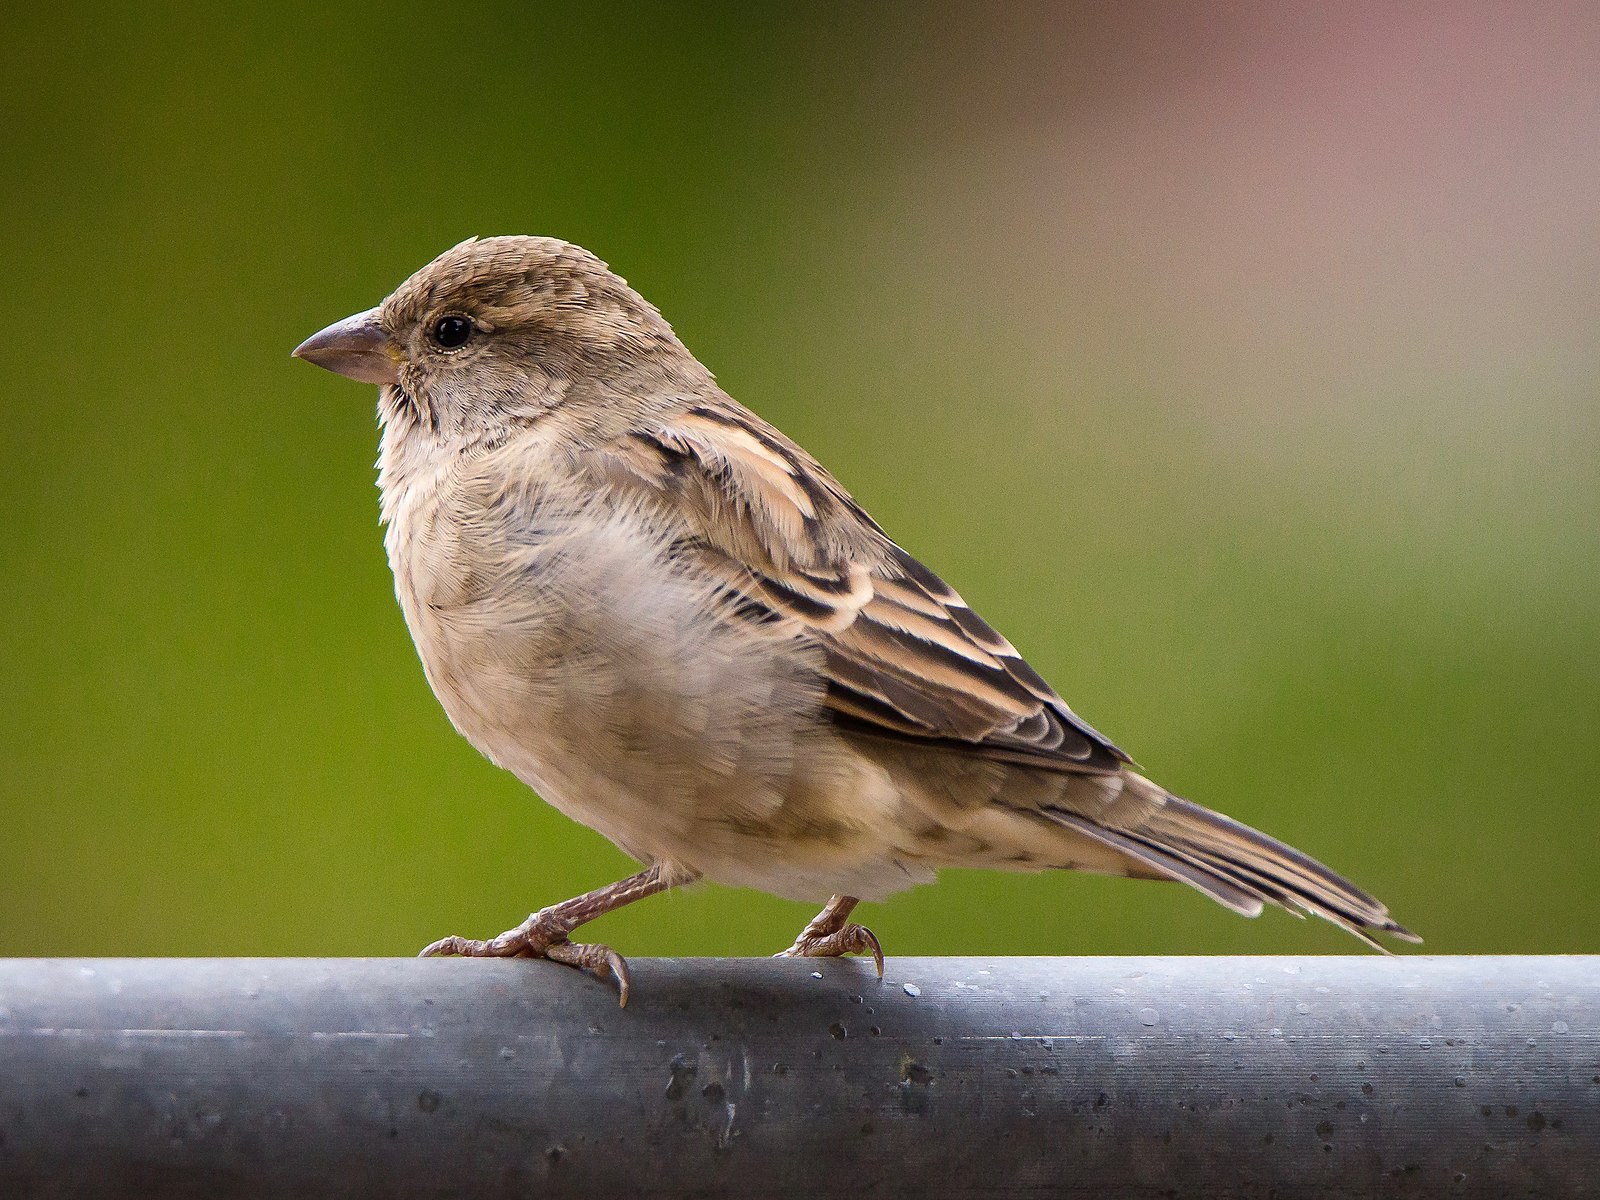 Female house sparrow spotted at Kodai